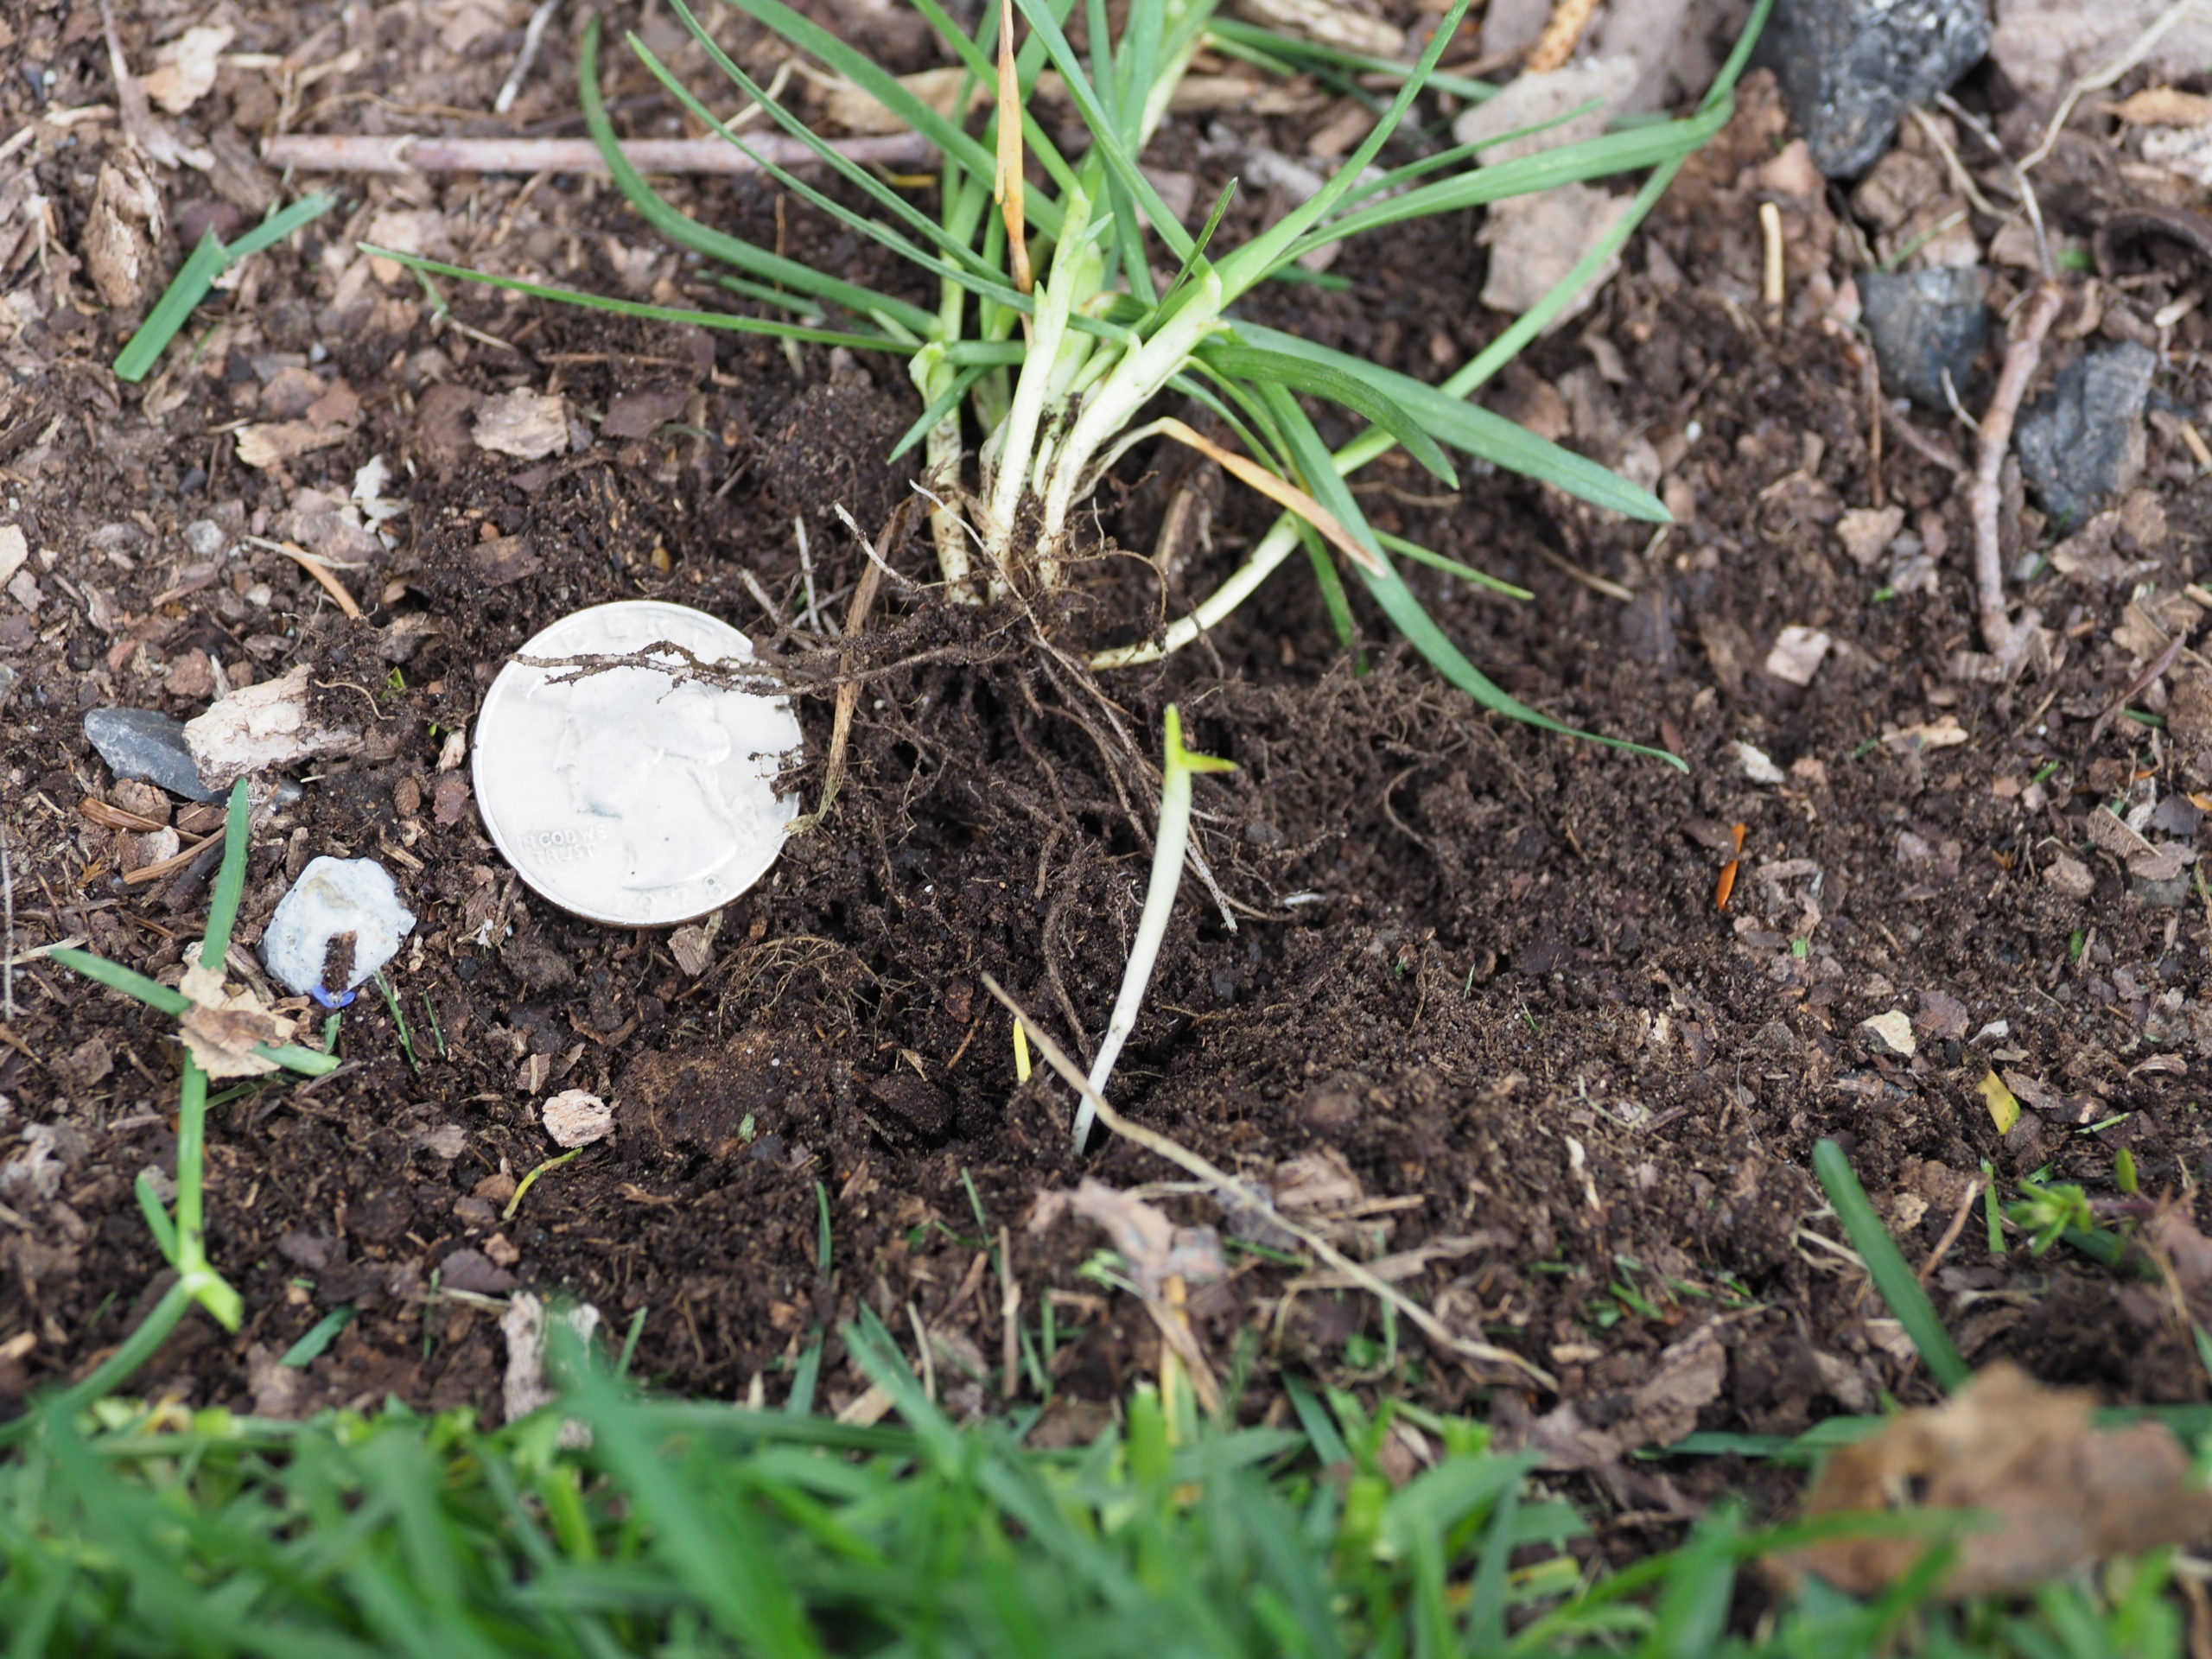 When the grass “sprig” above the quarter is pulled up it reveals not just its root system by the white-colored rhizome (about an inch to the right of the quarter) that ventured from the lawn into the landscape bed starting a new plant. Edging and pulling can simply remove these volunteers.